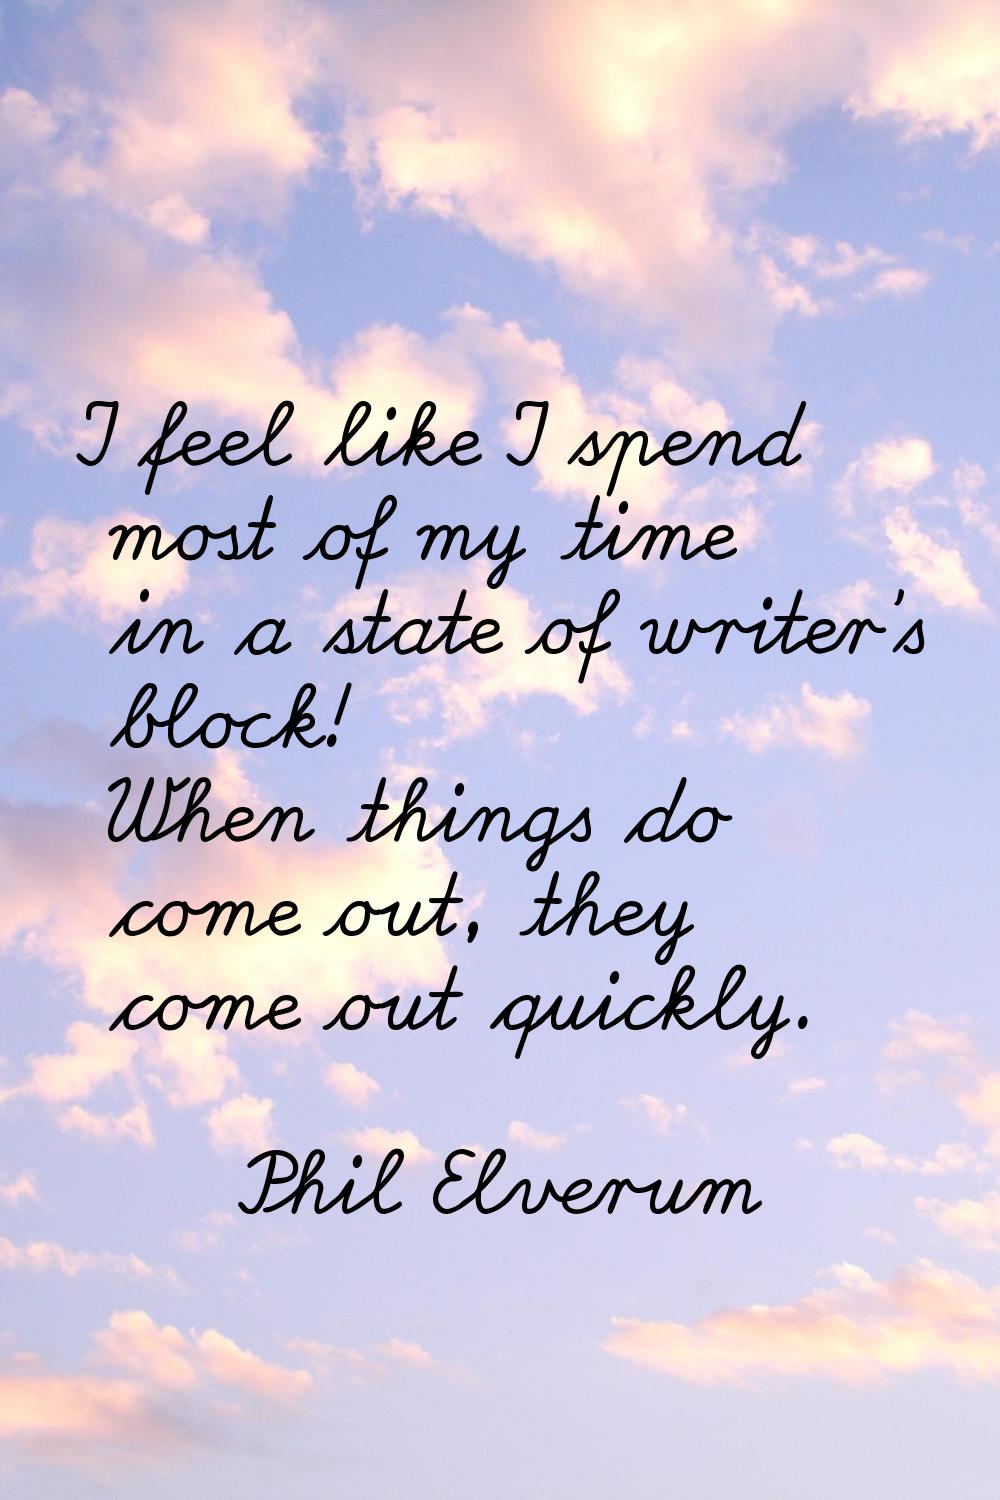 I feel like I spend most of my time in a state of writer's block! When things do come out, they com